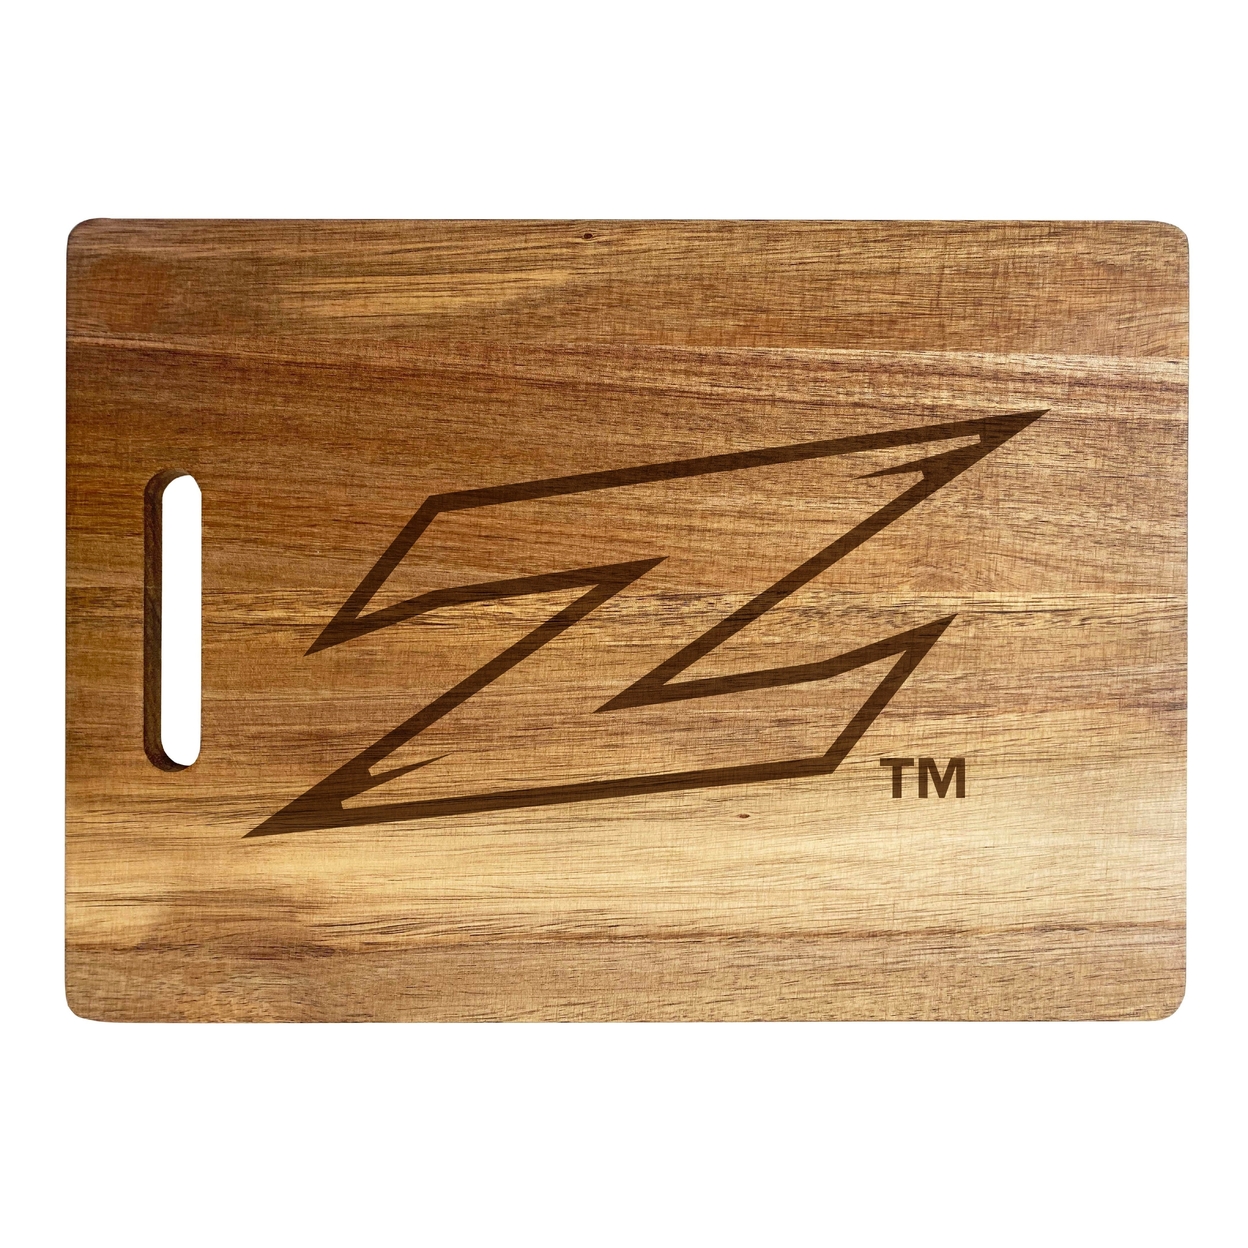 Akron Zips Engraved Wooden Cutting Board 10 X 14 Acacia Wood - Large Engraving